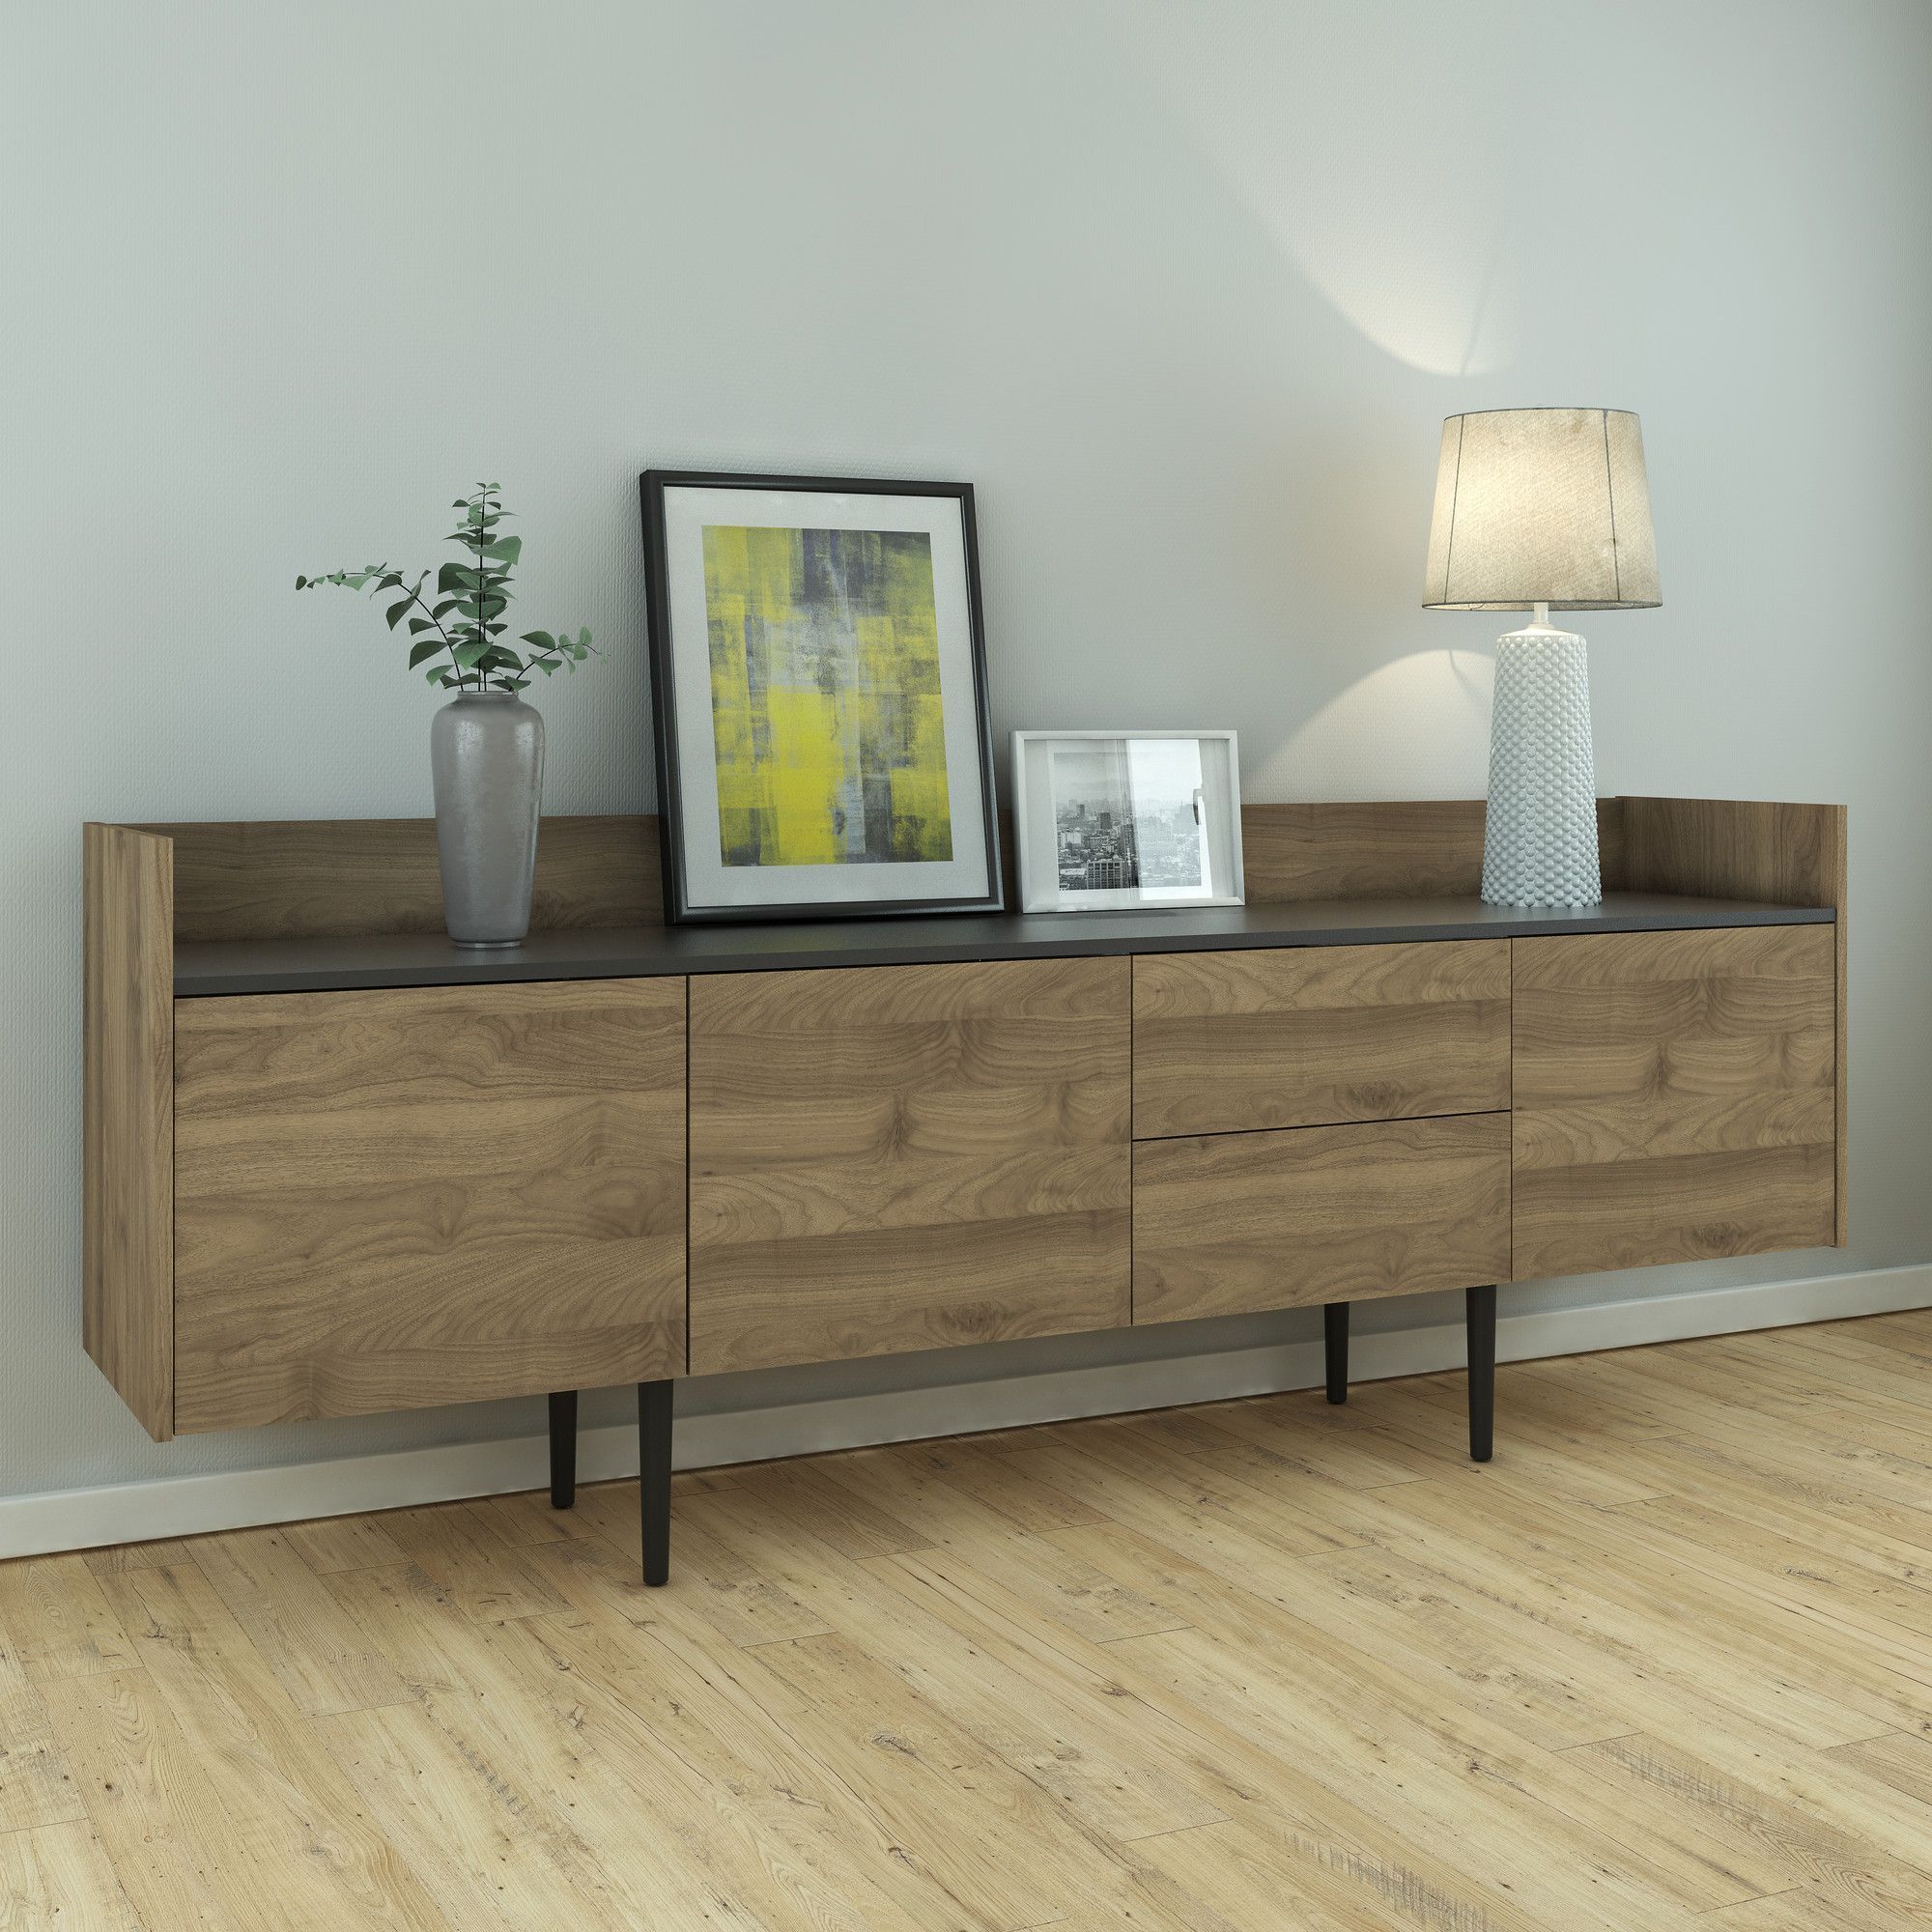 Unit Sideboard | Products | Sideboard Buffet, Sideboard Within 2018 Dovray Sideboards (View 18 of 20)